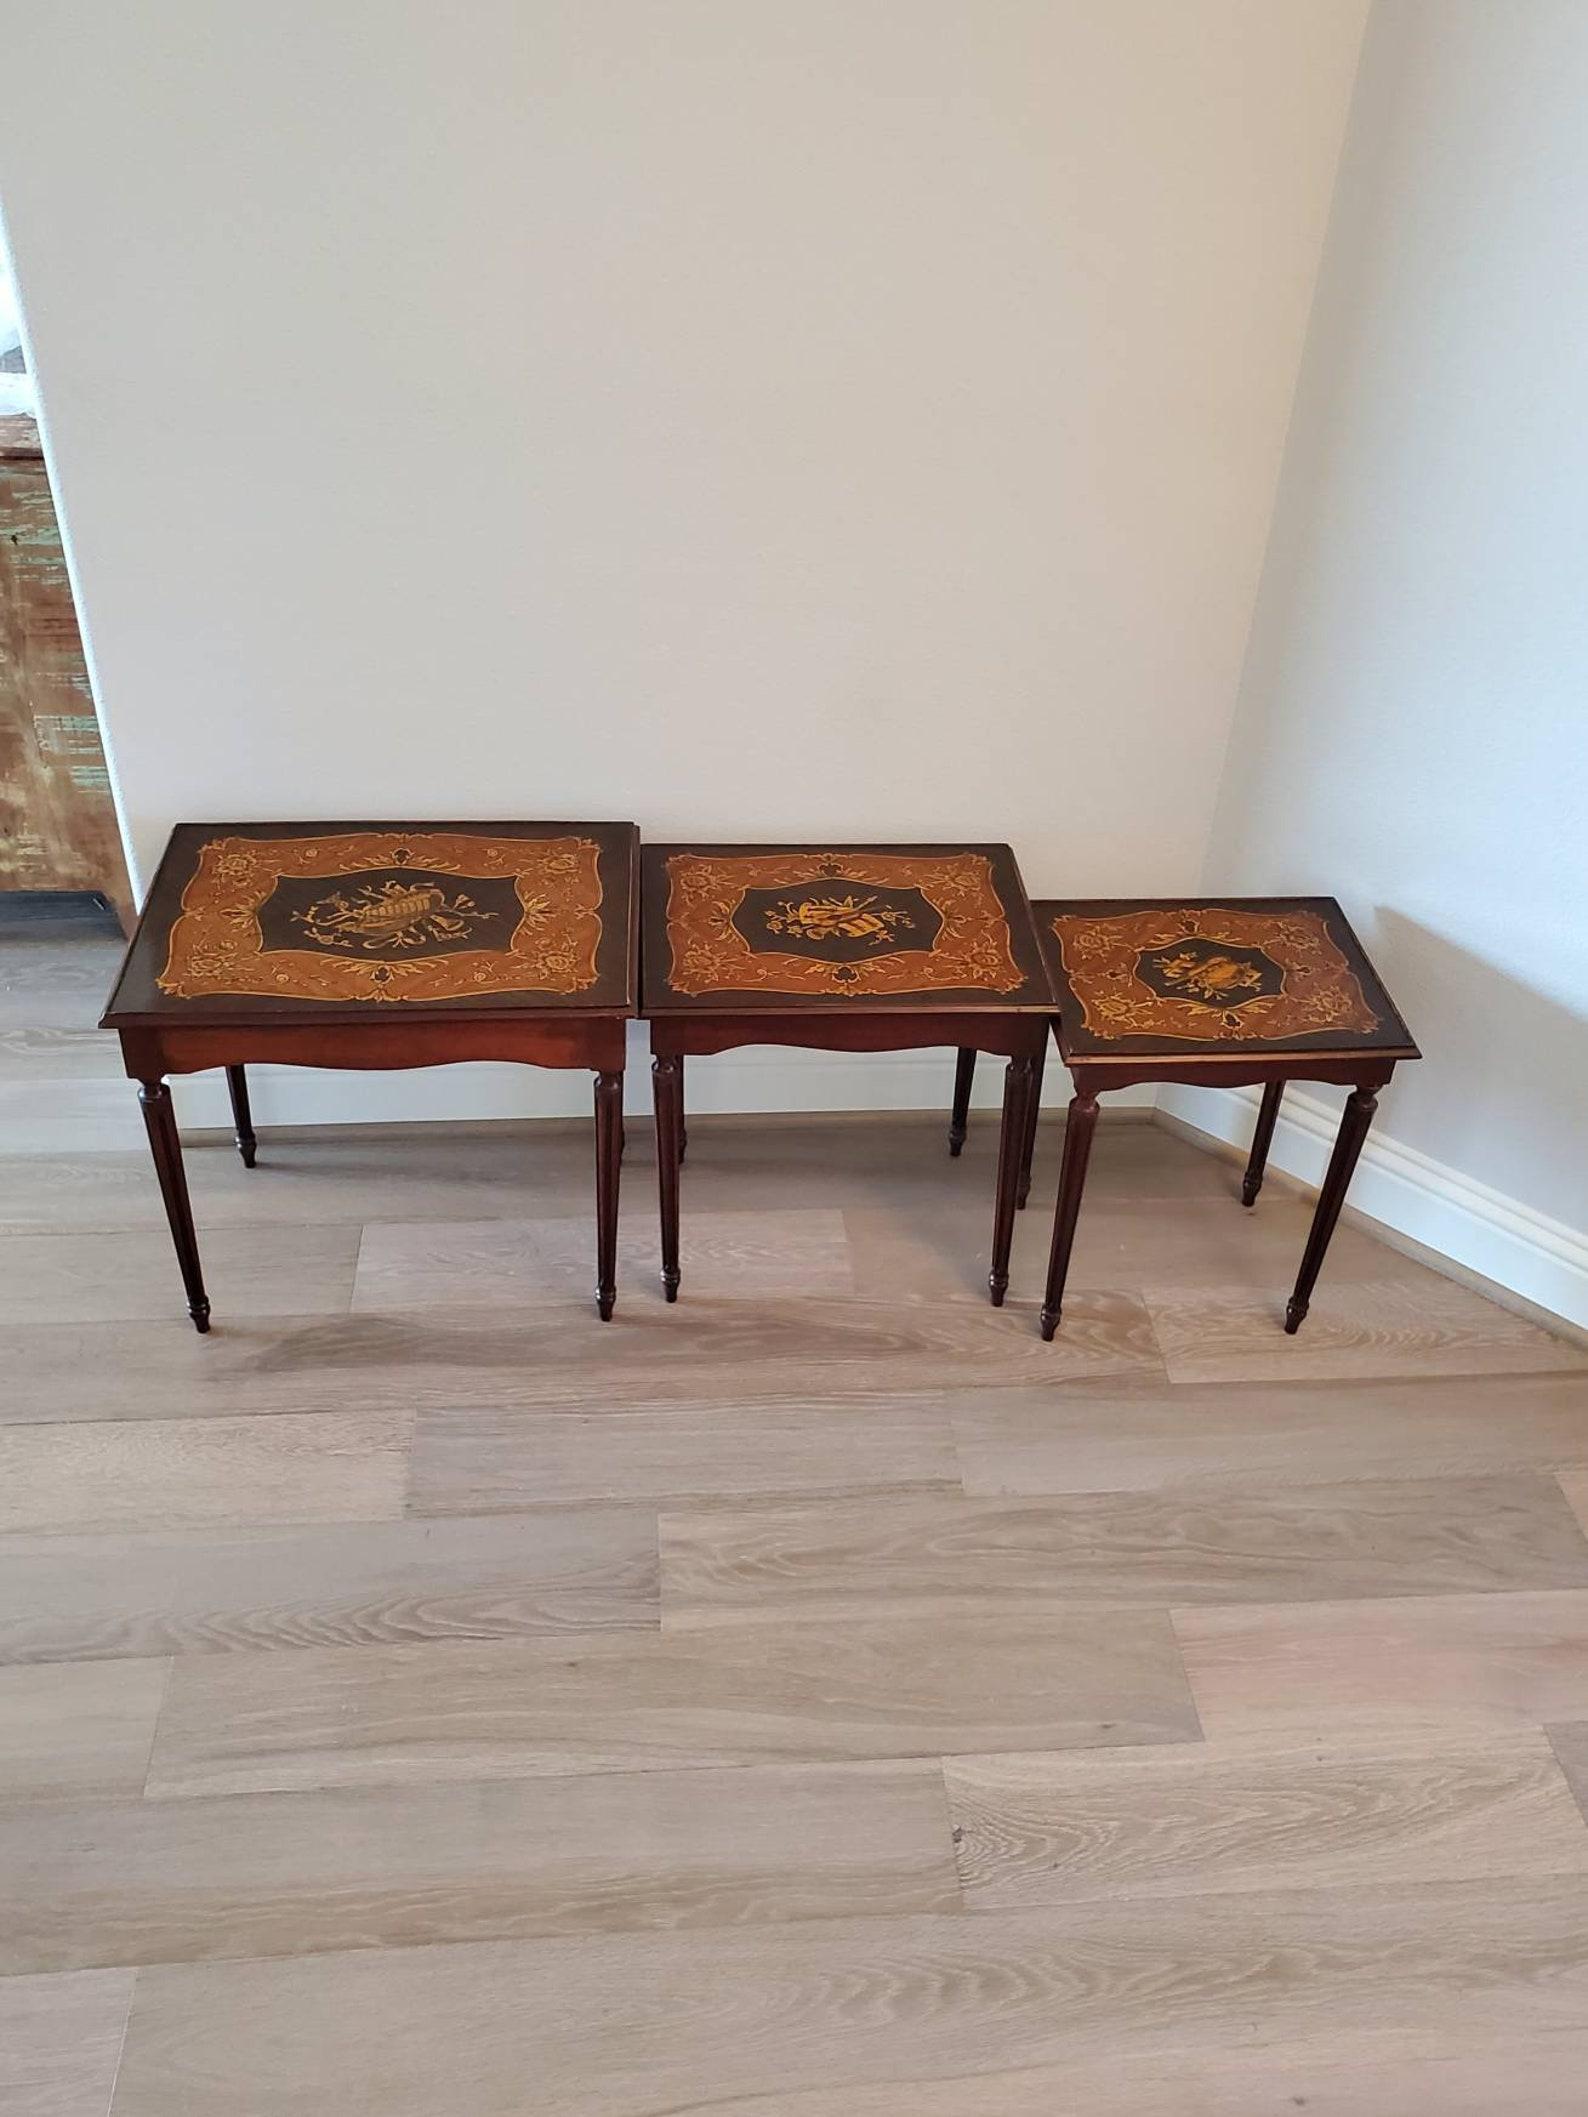 A beautiful nest of three Italian mahogany marquetry inlaid tables from the late 19th - early 20th century. The trio of antique tables feature finely detailed marquetry inlaid tops with wonderful musical instruments, flower and foliate decoration in